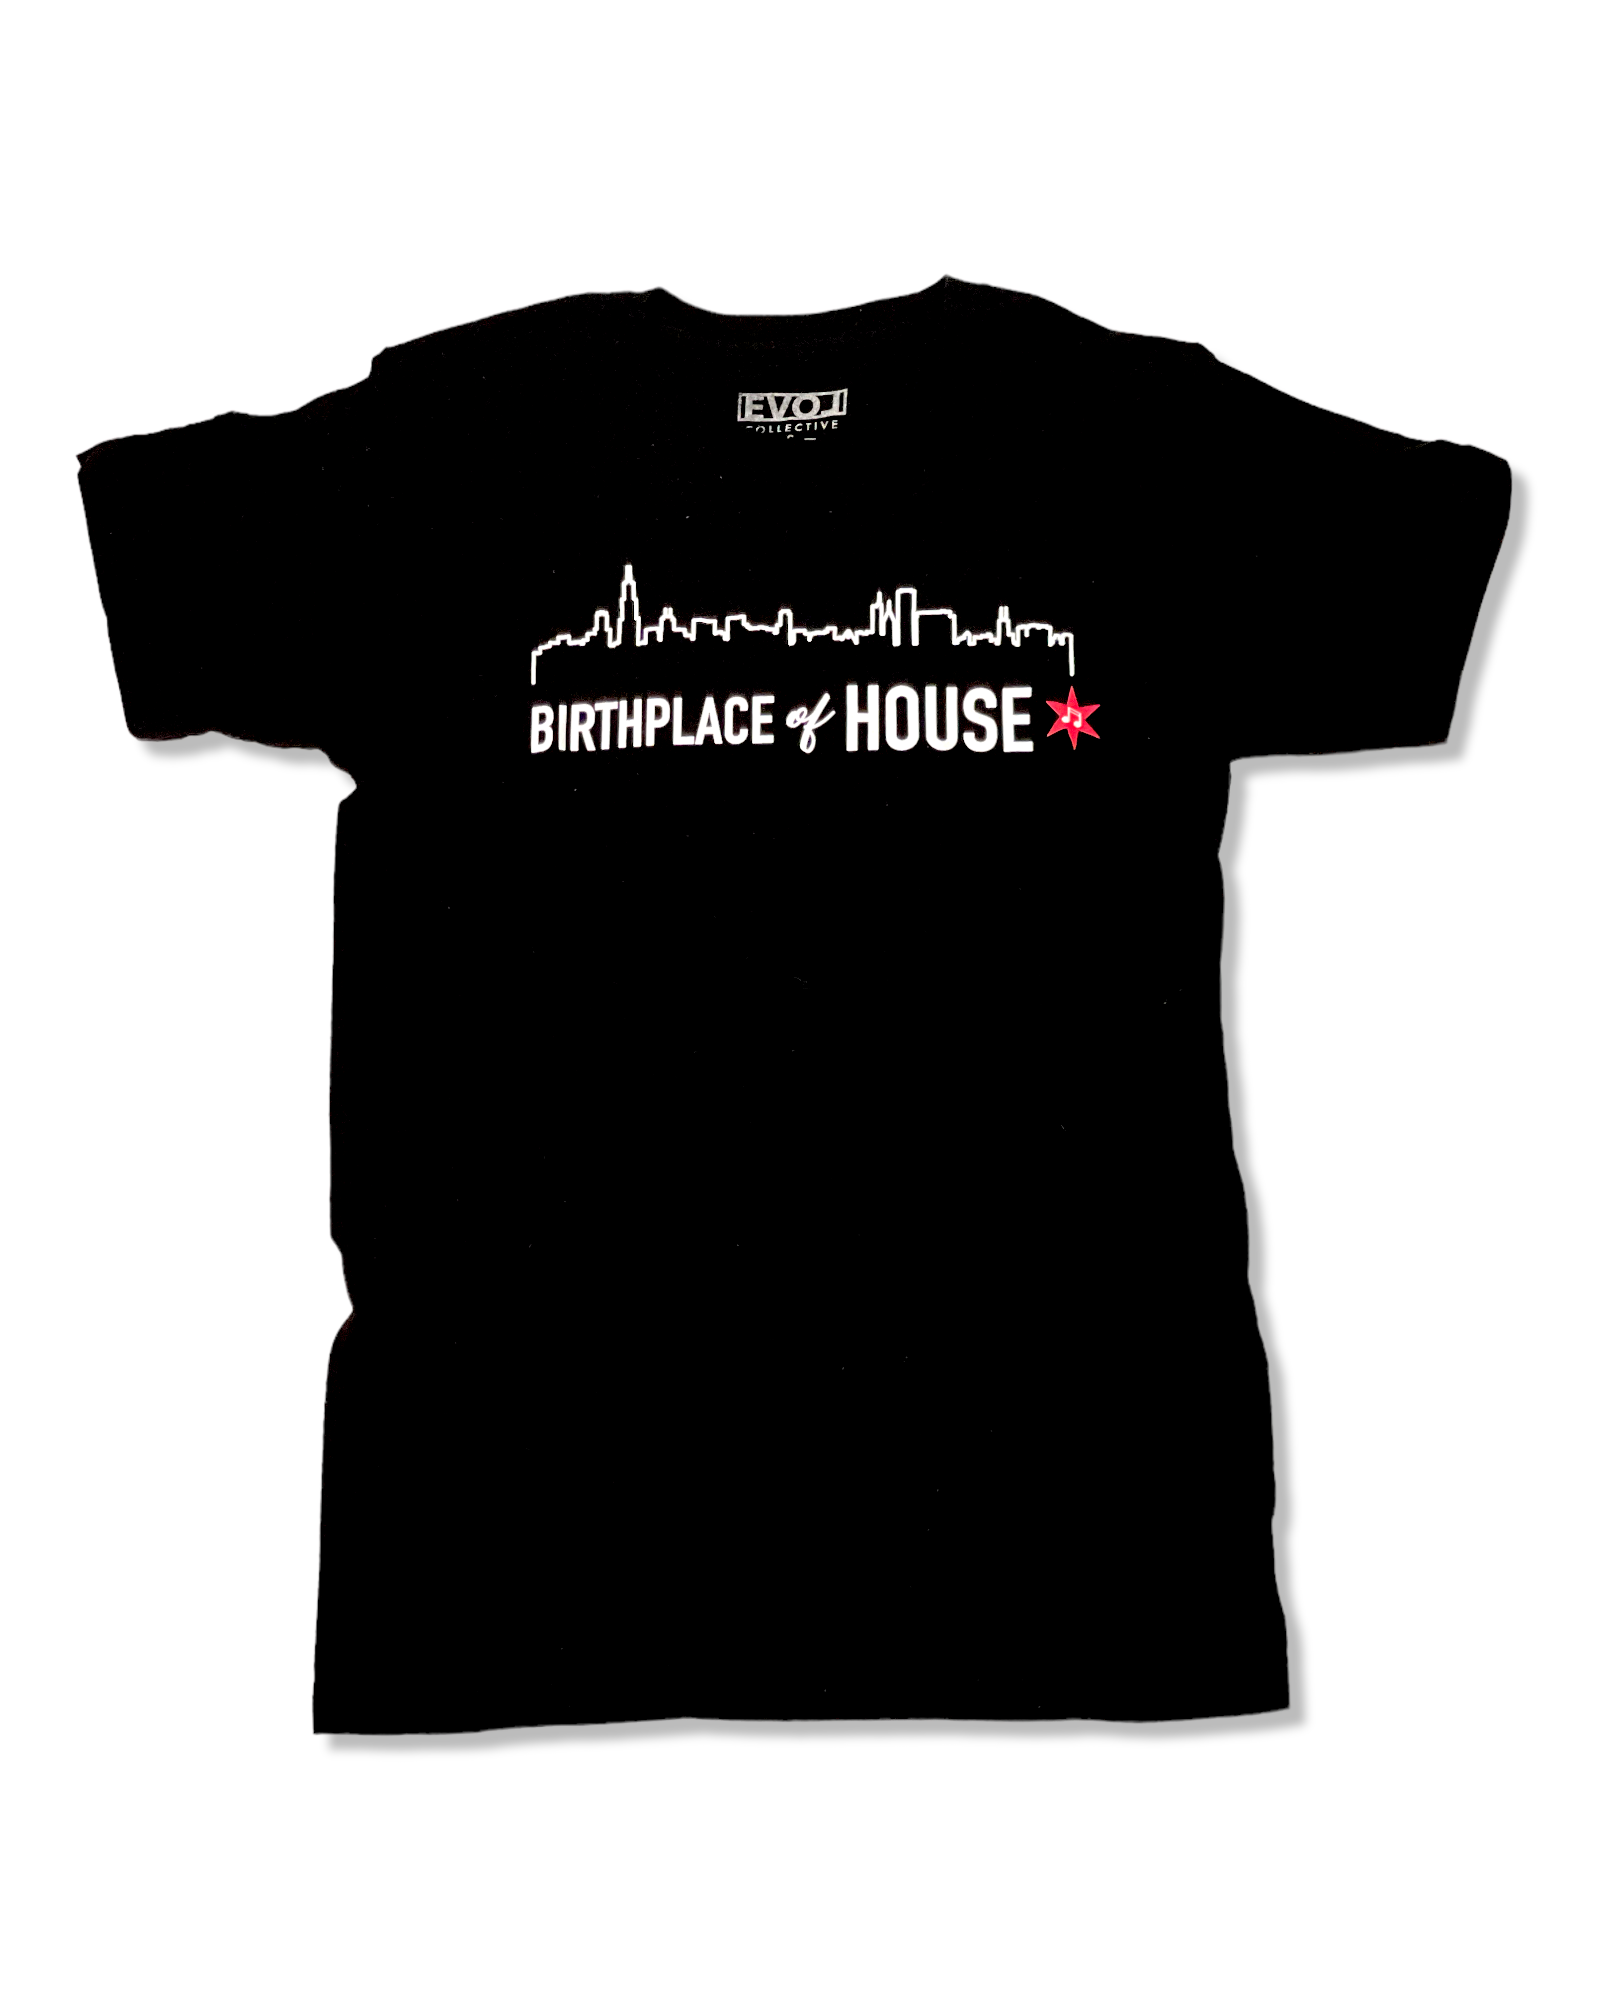 Birthplace of House Music T-shirt